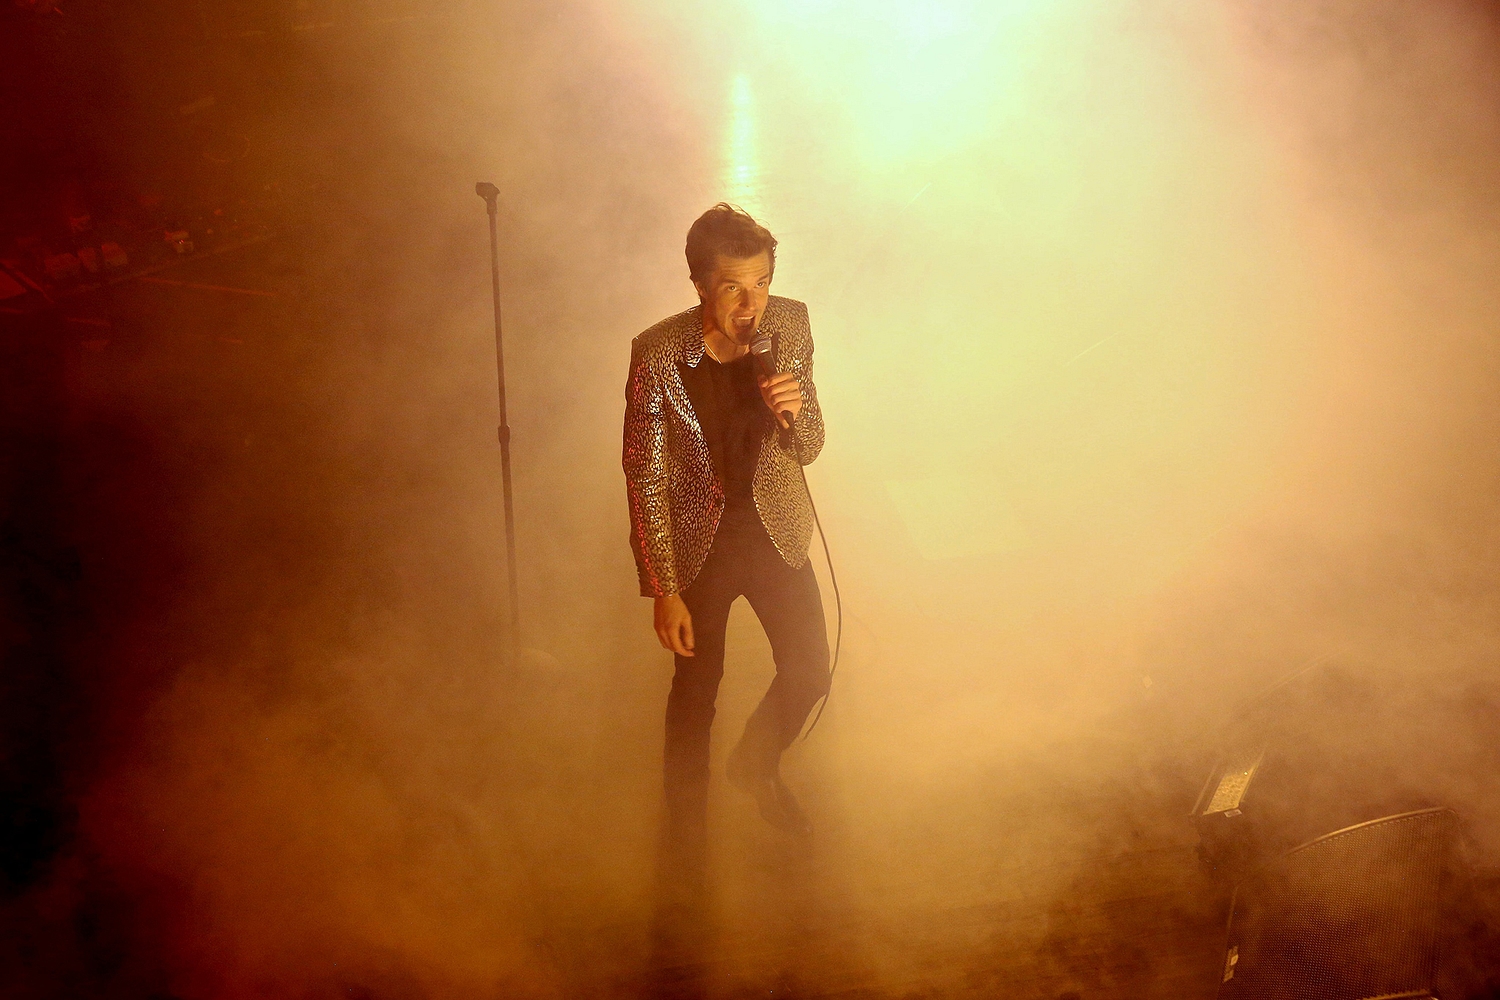 Brandon Flowers: "I was able to do whatever I could dream of"